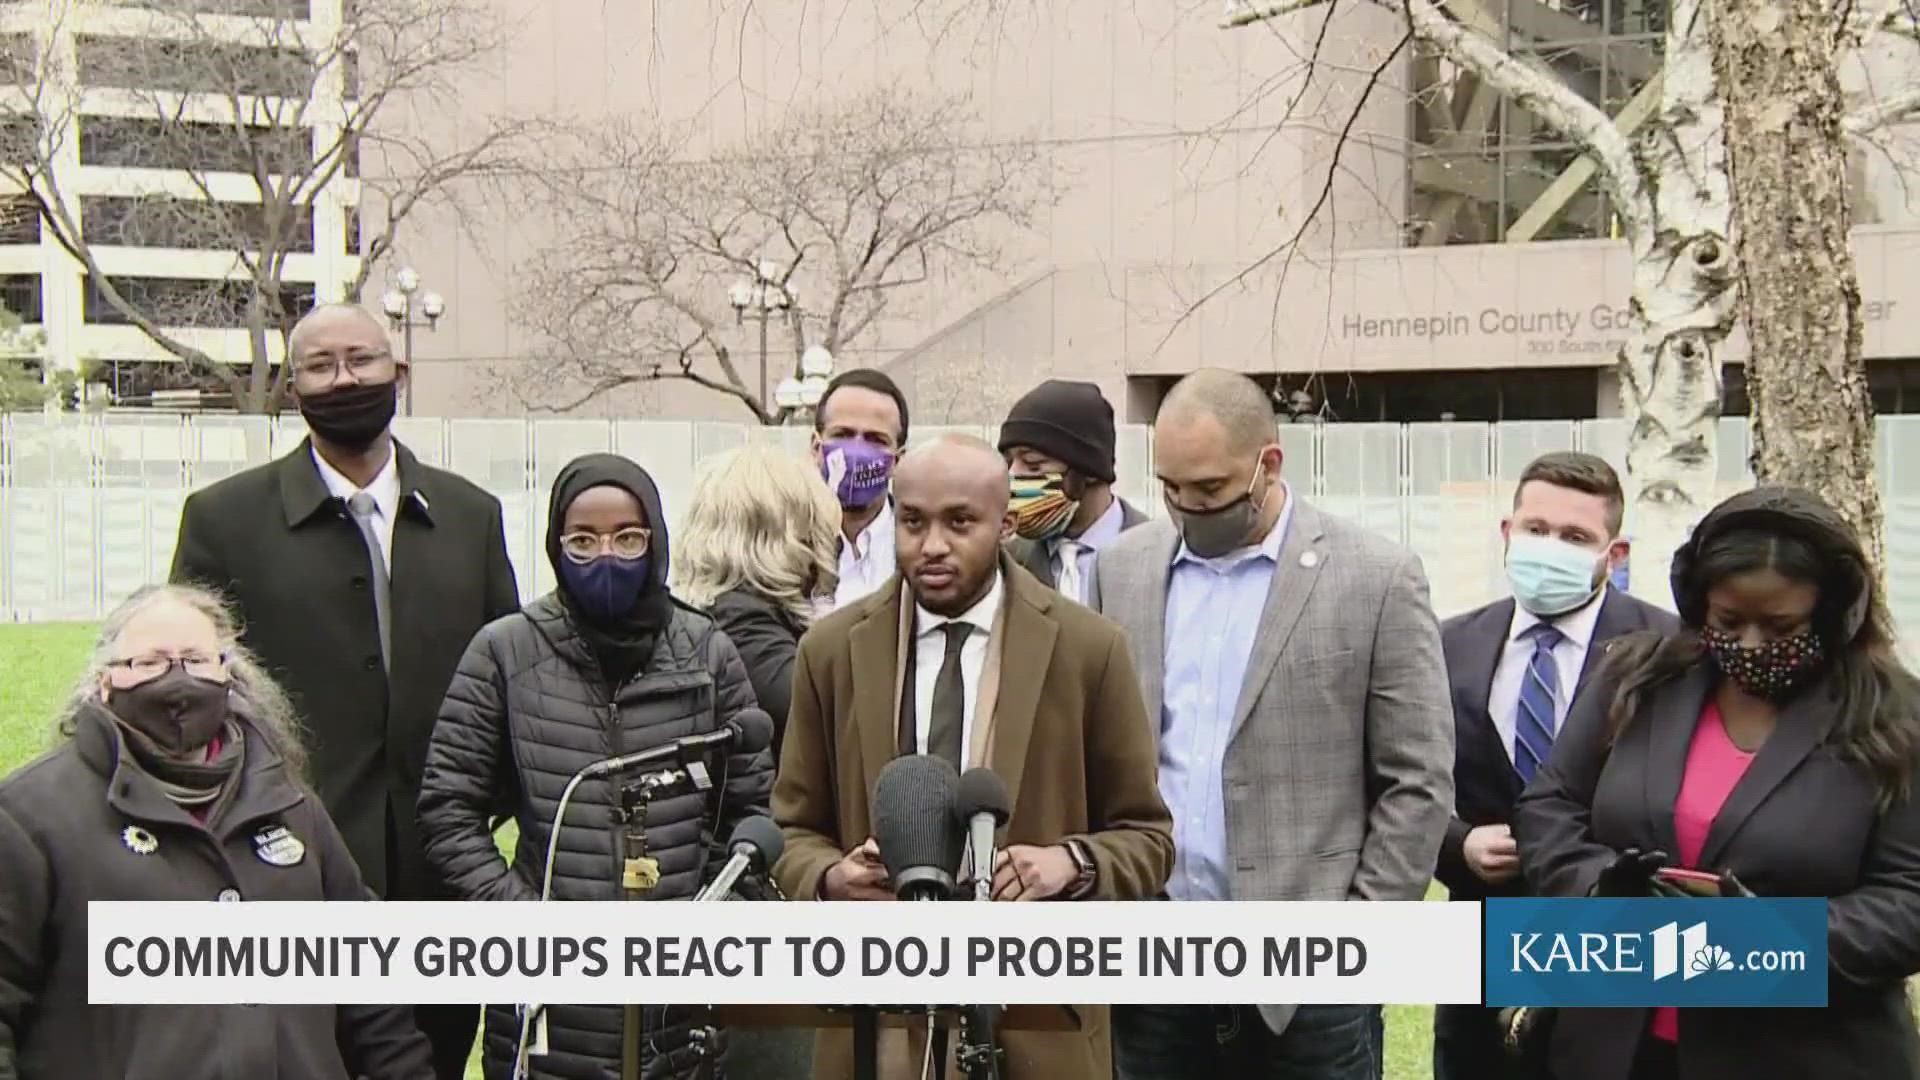 CAIR-MN organized a press conference with several community groups to demand more federal action to address flaws within the policing system across Minnesota.